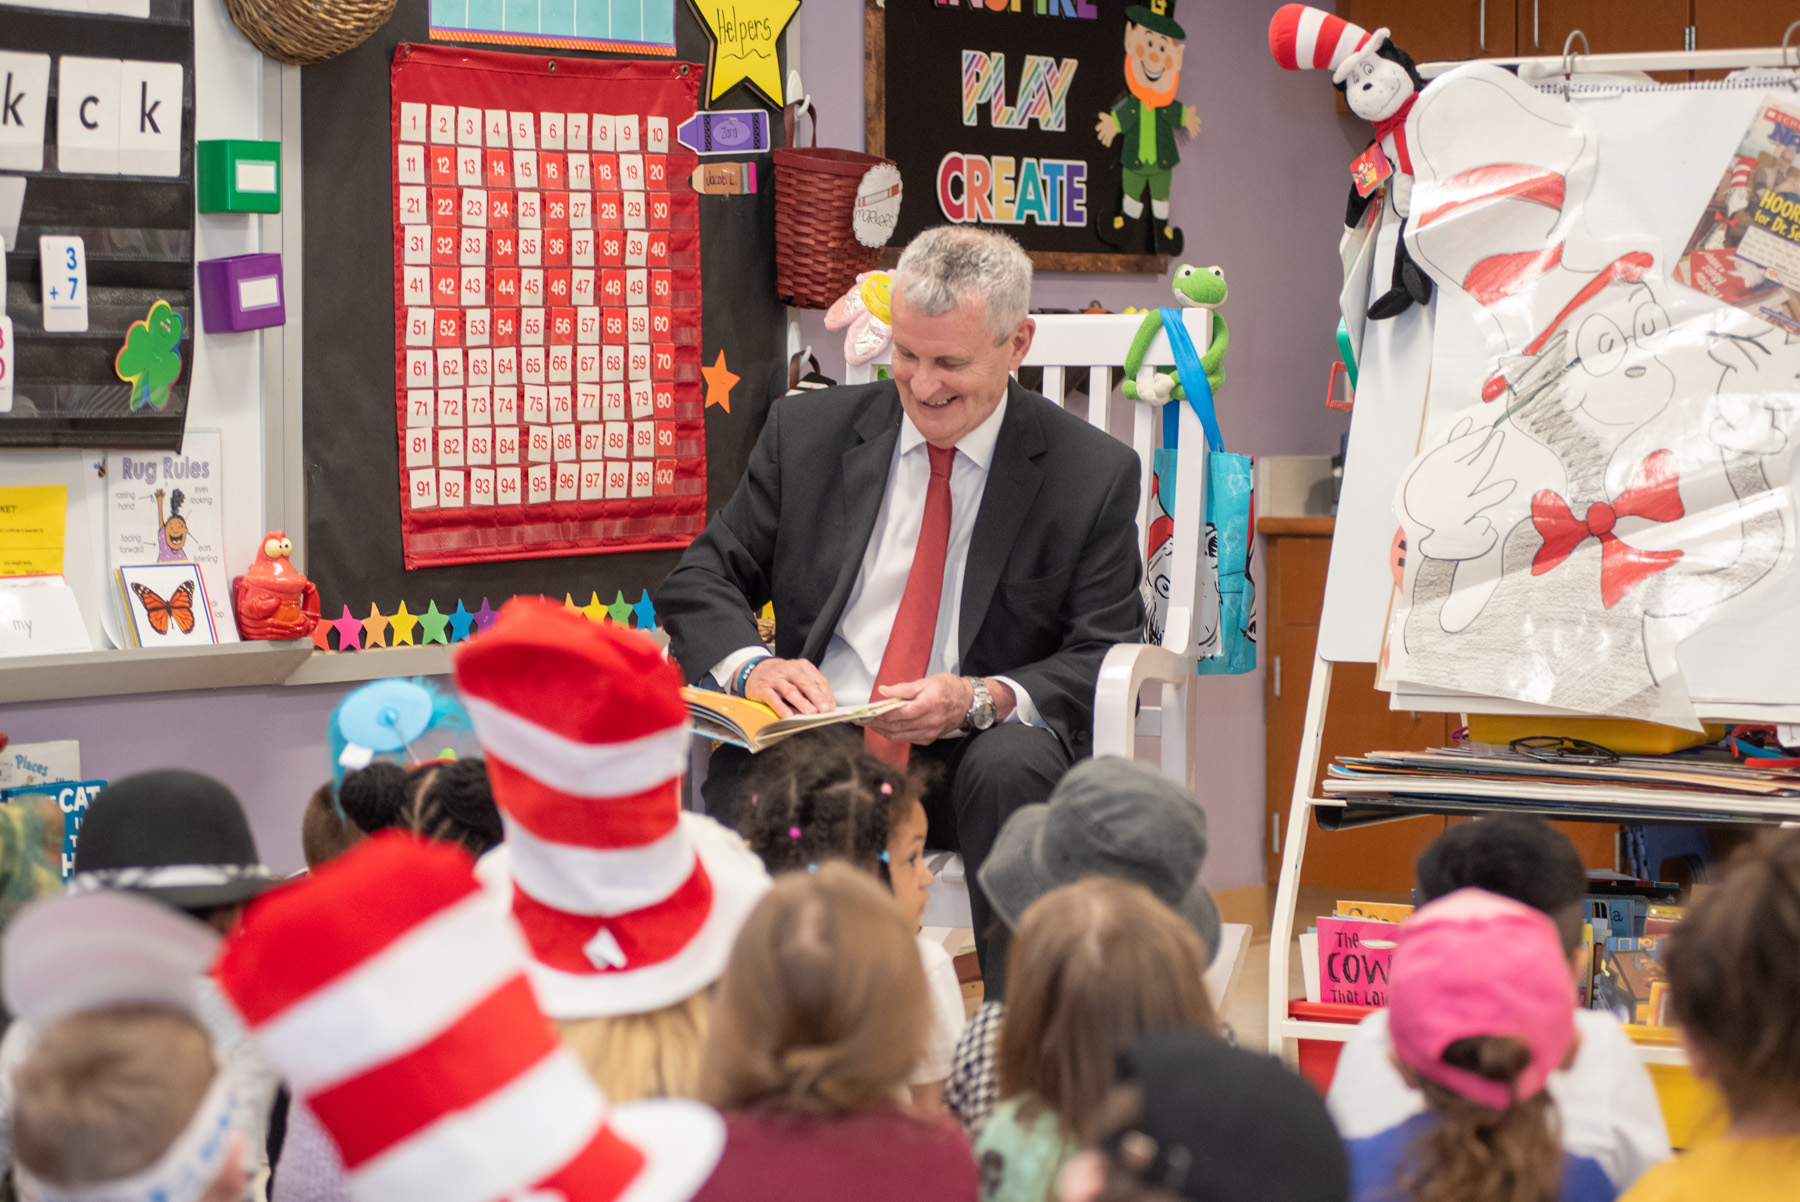 President Leary helps encourage children's love of reading